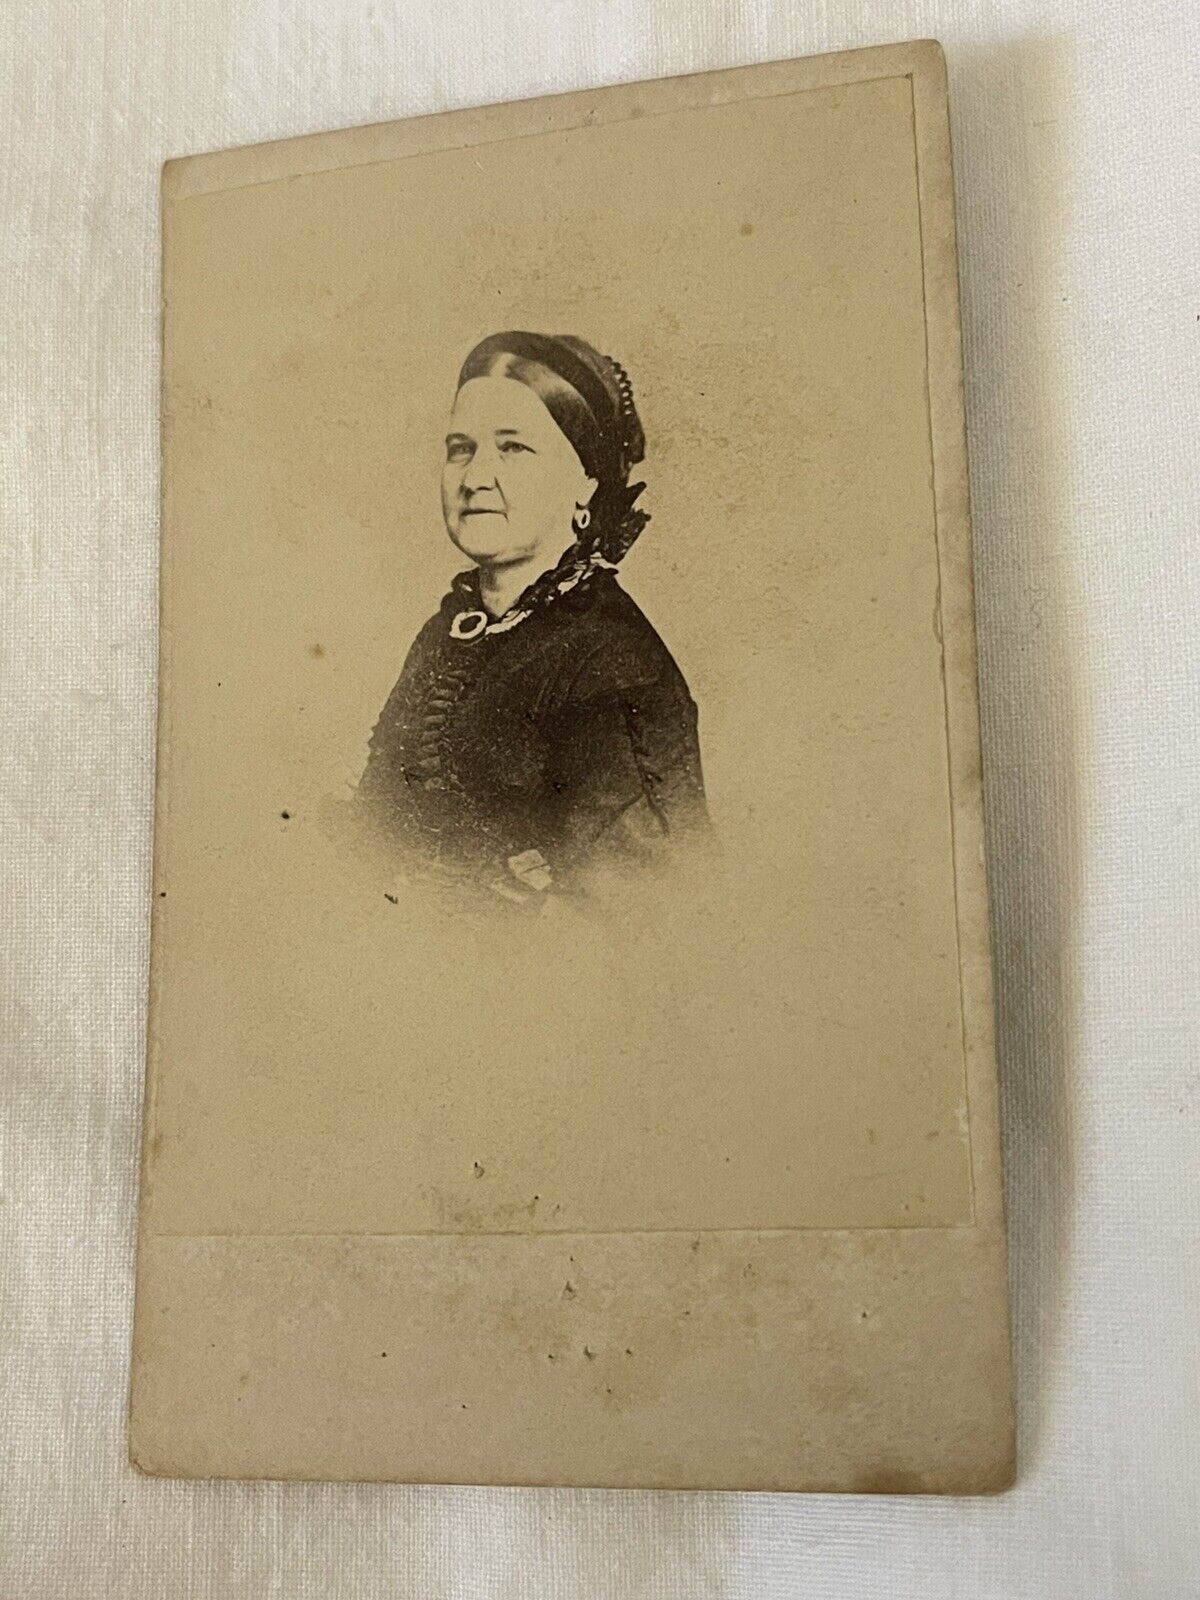 First Lady Mary Todd Lincoln mourning dress bonnet CDV photo c. 1860s ...